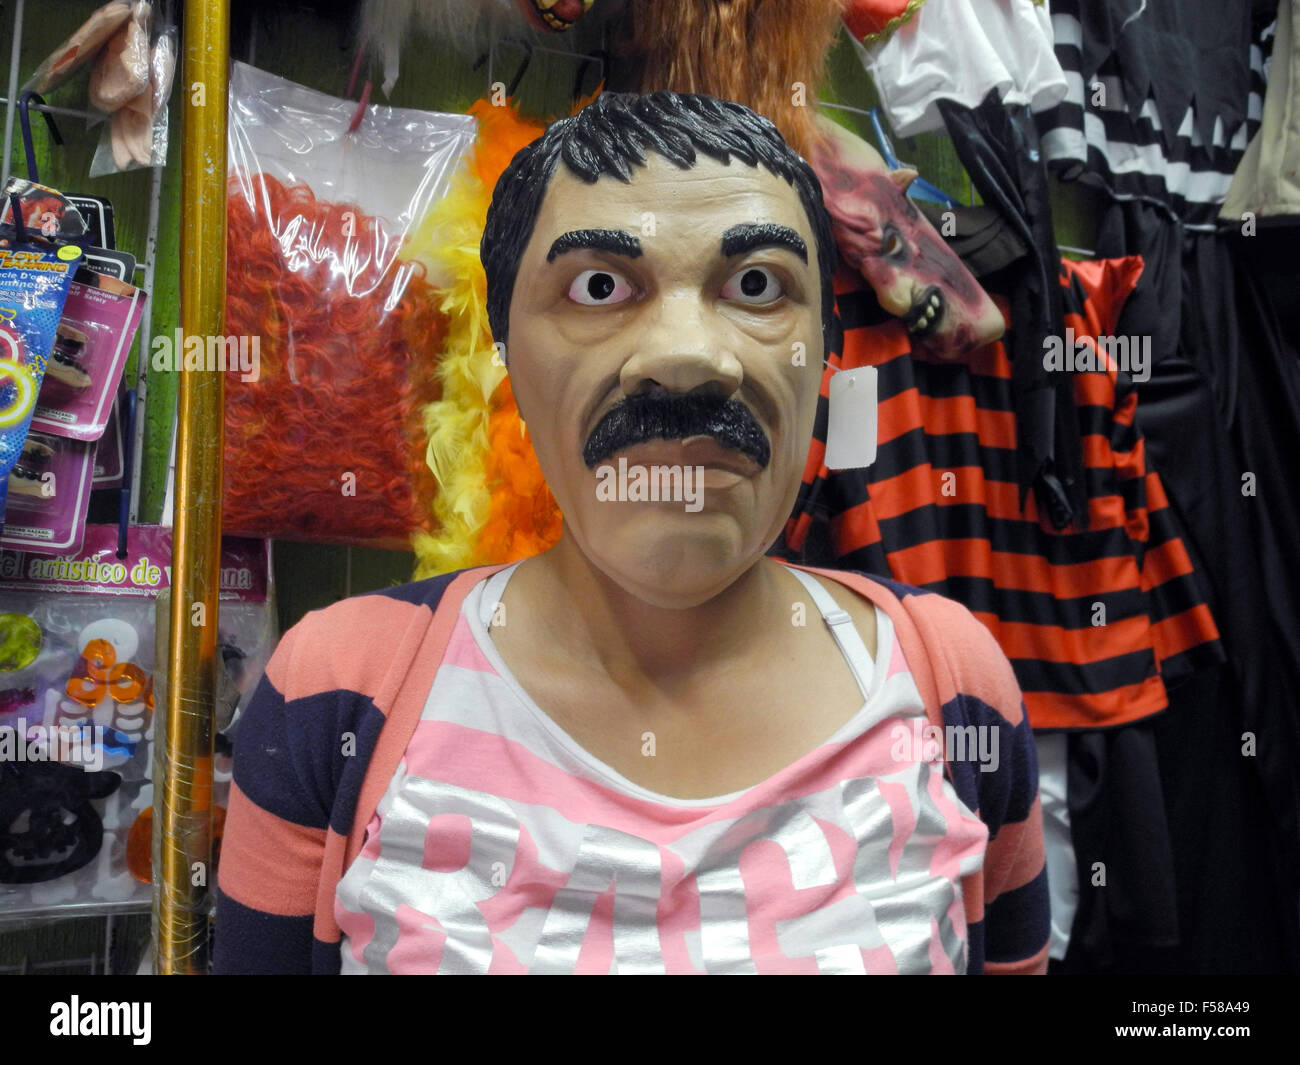 Mexico City, Mexico. 27th Oct, 2015. The mask of Mexican drug kingpin Joaquin 'El Chapo' Guzman in a marketplace in Mexico City, Mexico, 27 October 2015. The fugitive drug lord will turn up this year alongside vampires, zombies, and witches at Halloween parties. The masks of the mustachioed cartel leader are the bestseller in the markets of Mexico City. Photo: CARMEN PENA/dpa/Alamy Live News Stock Photo